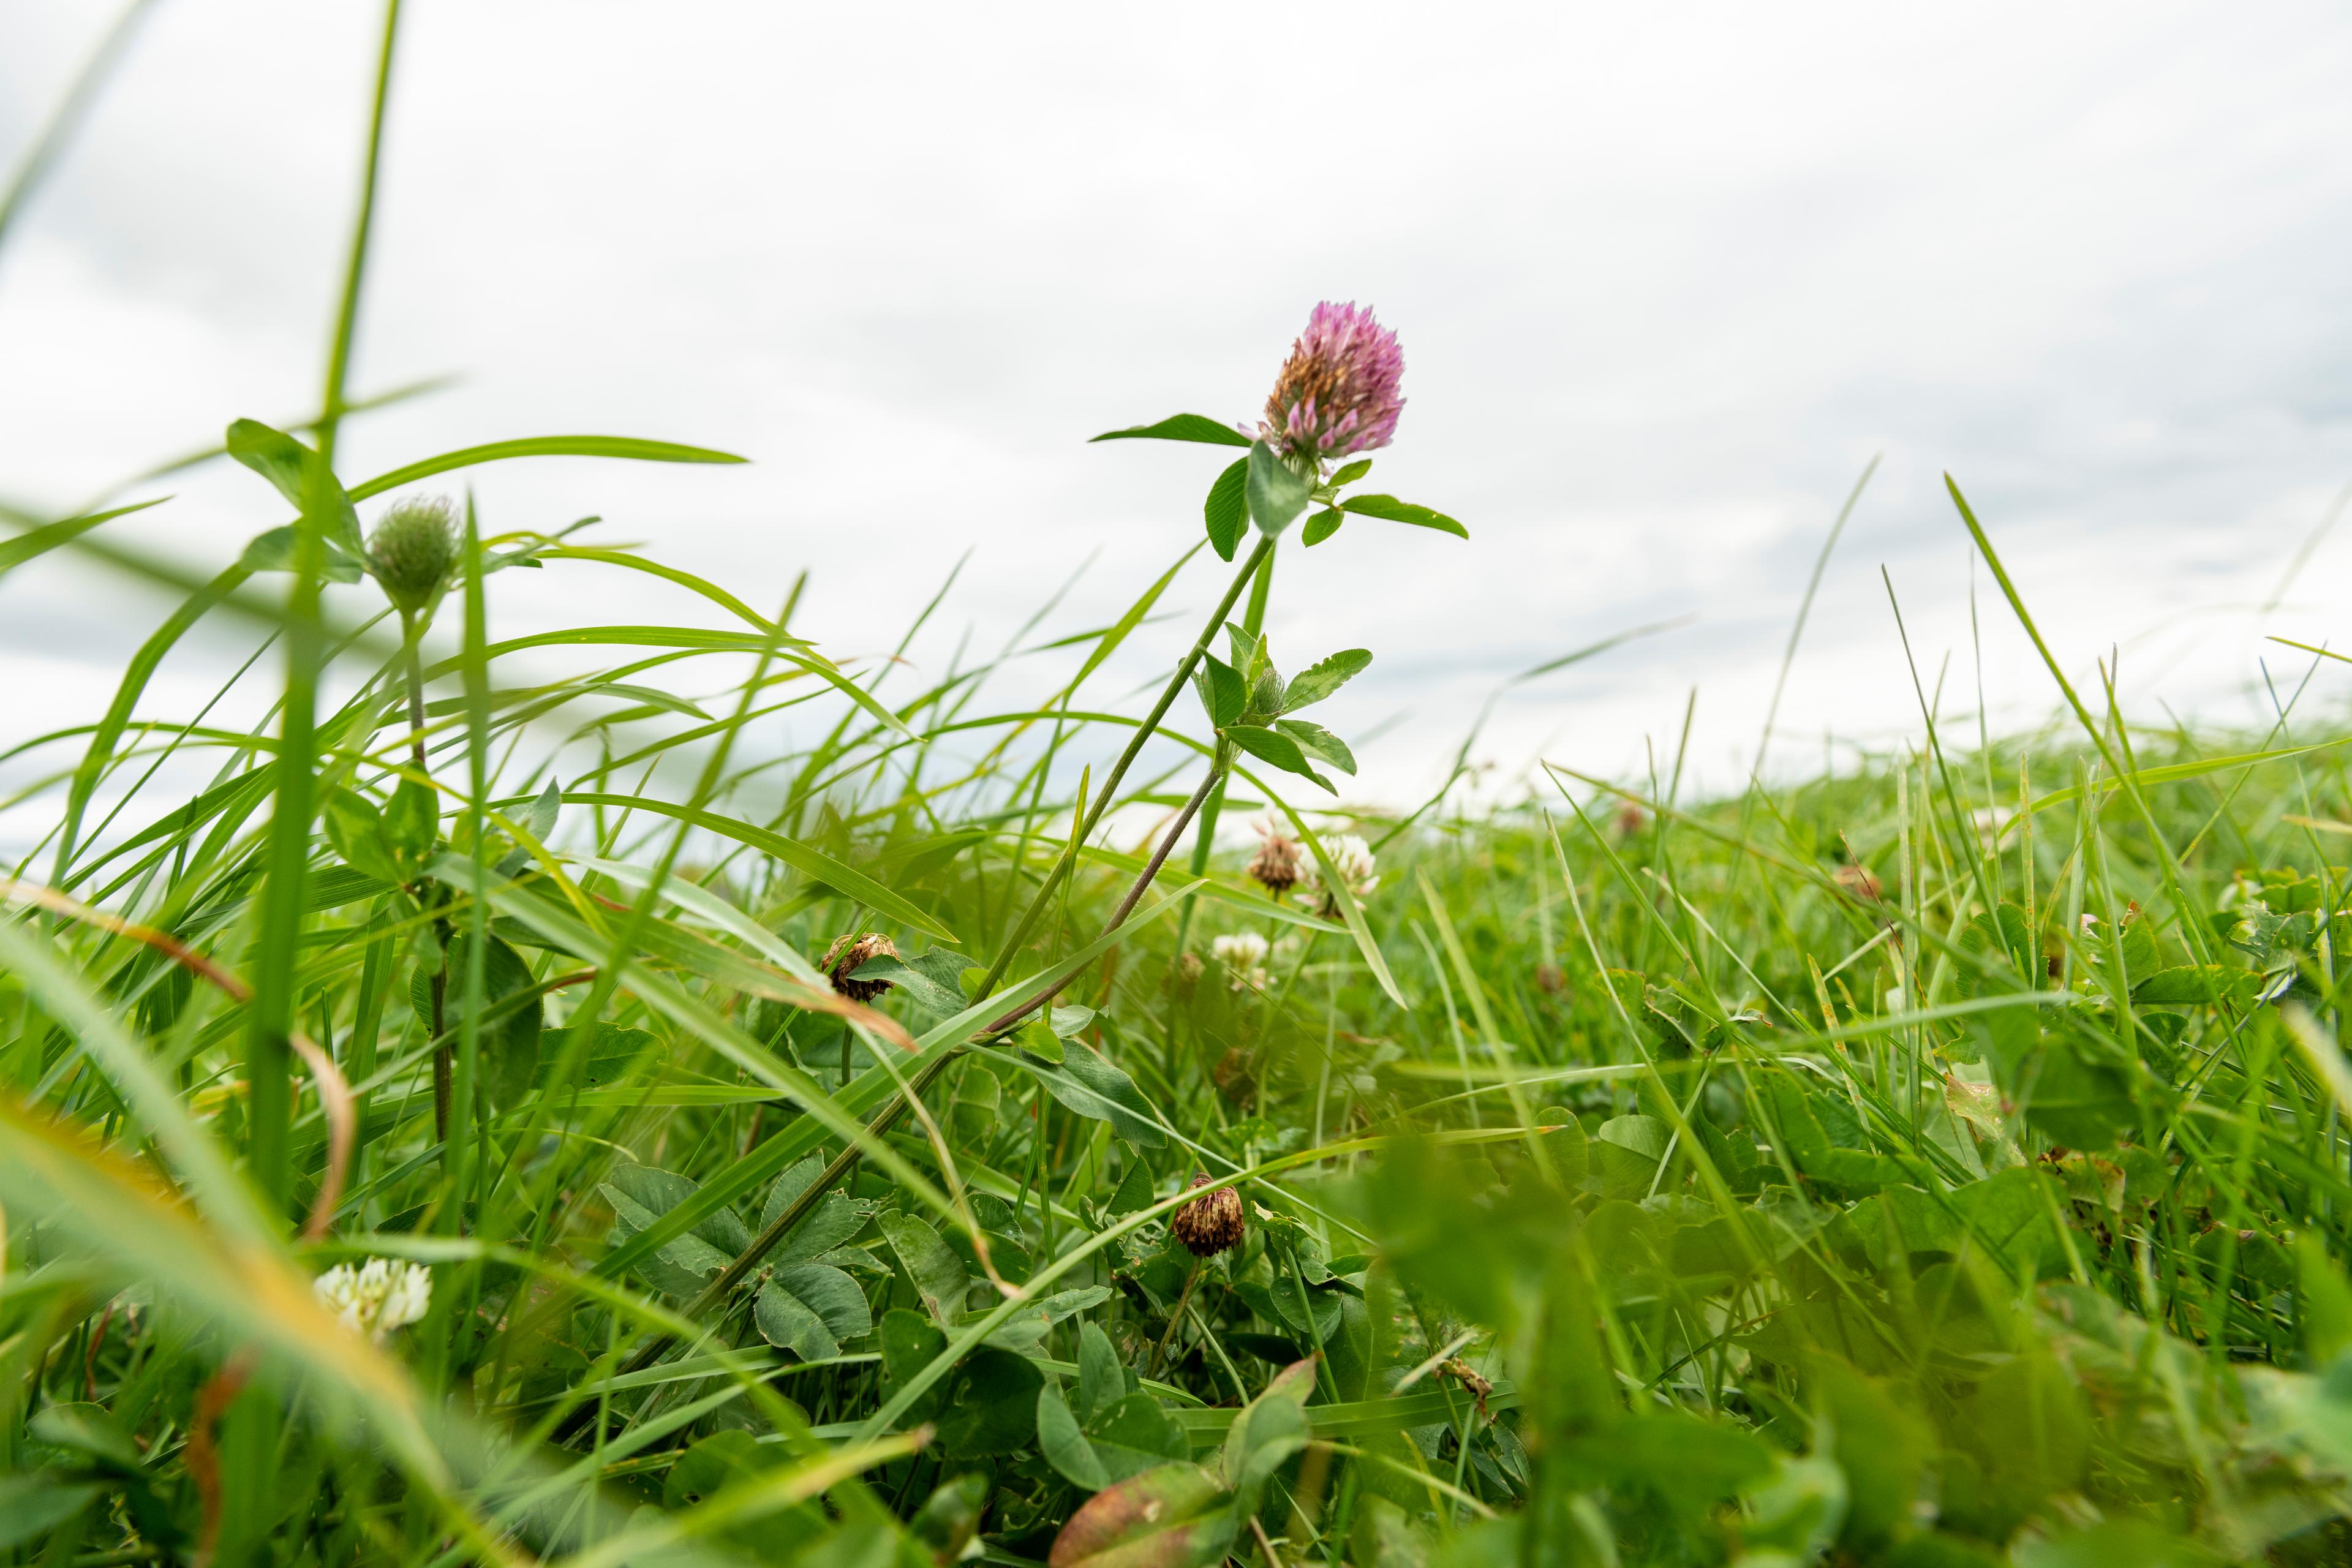 Clover is common in organic pasture.